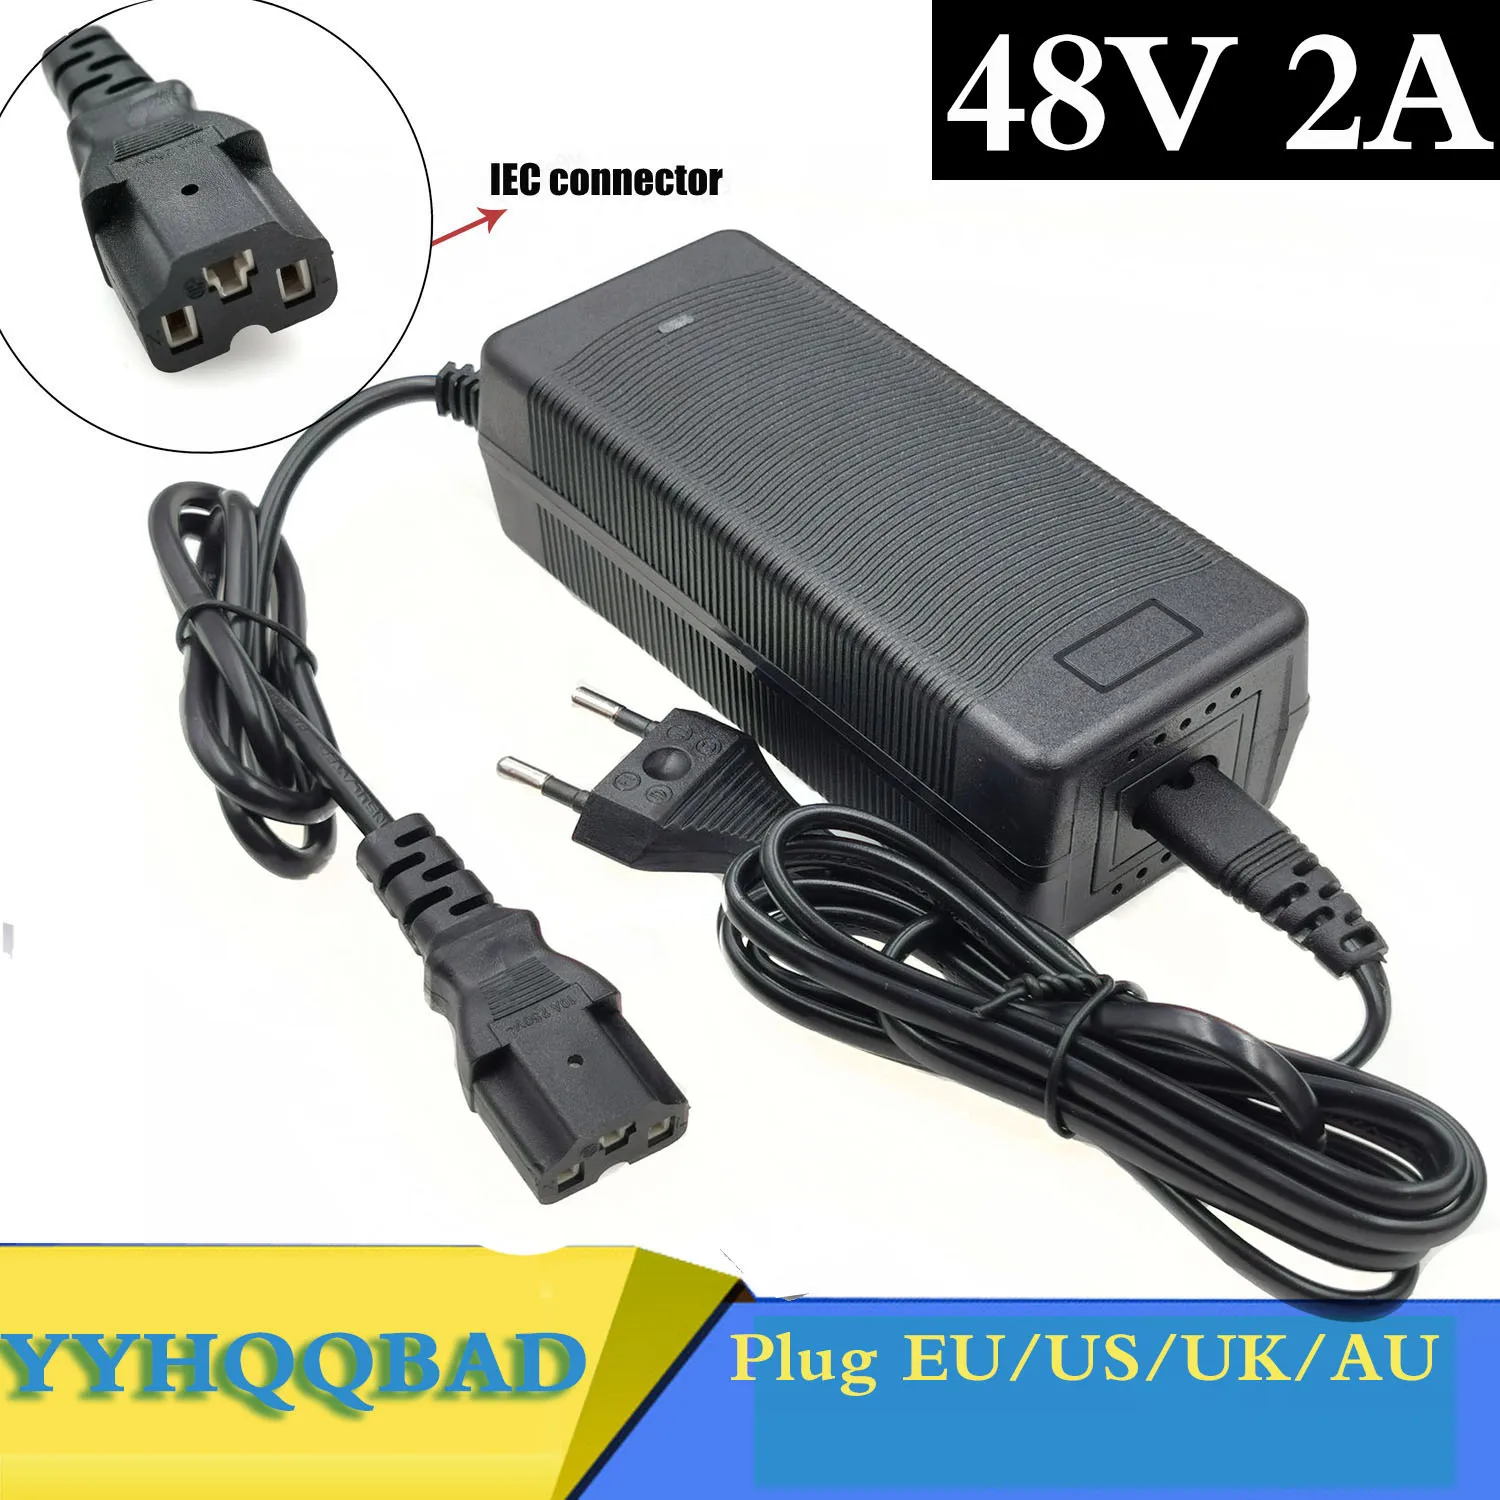 48V Volt battery Charger for Electric Scooter ATV BC05 E Bike PC Style Port 